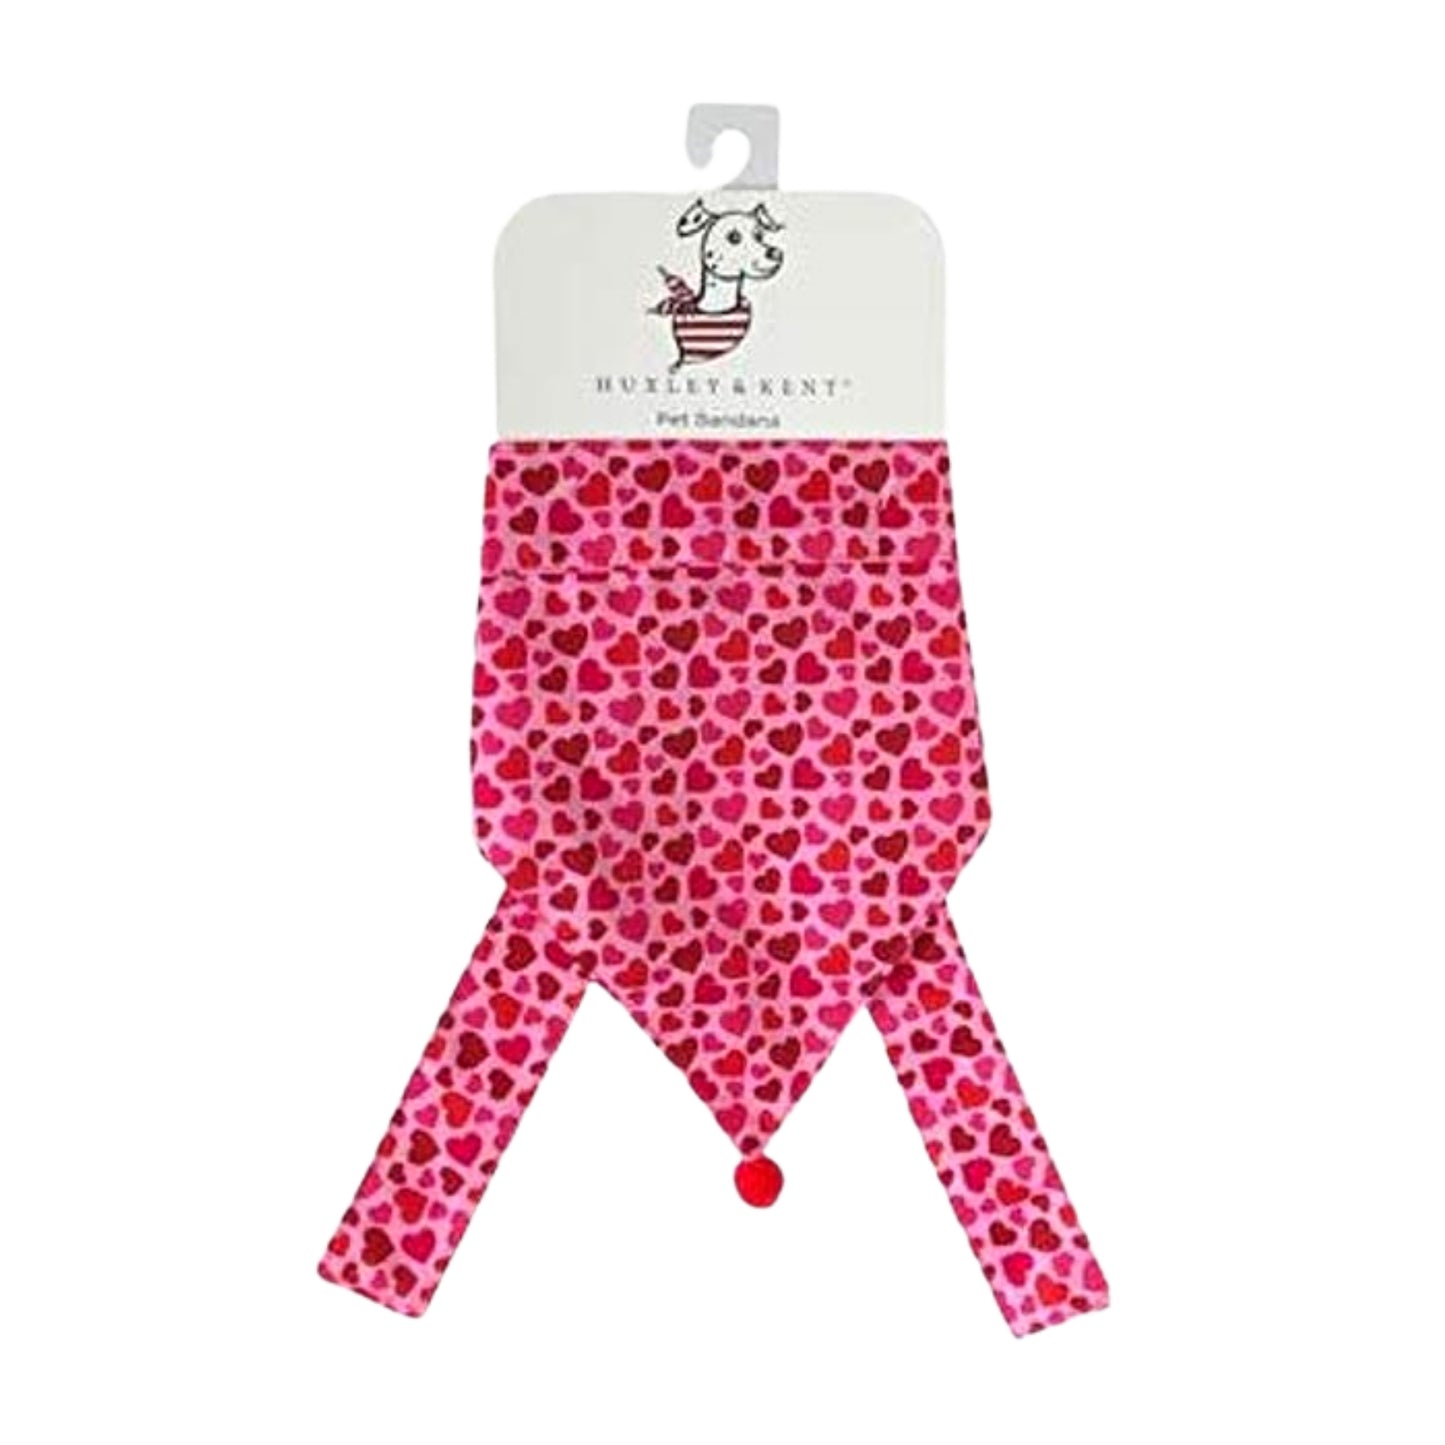 Huxley & Kent Puppy Love Valentine's Day Bandana for Pets (Large)